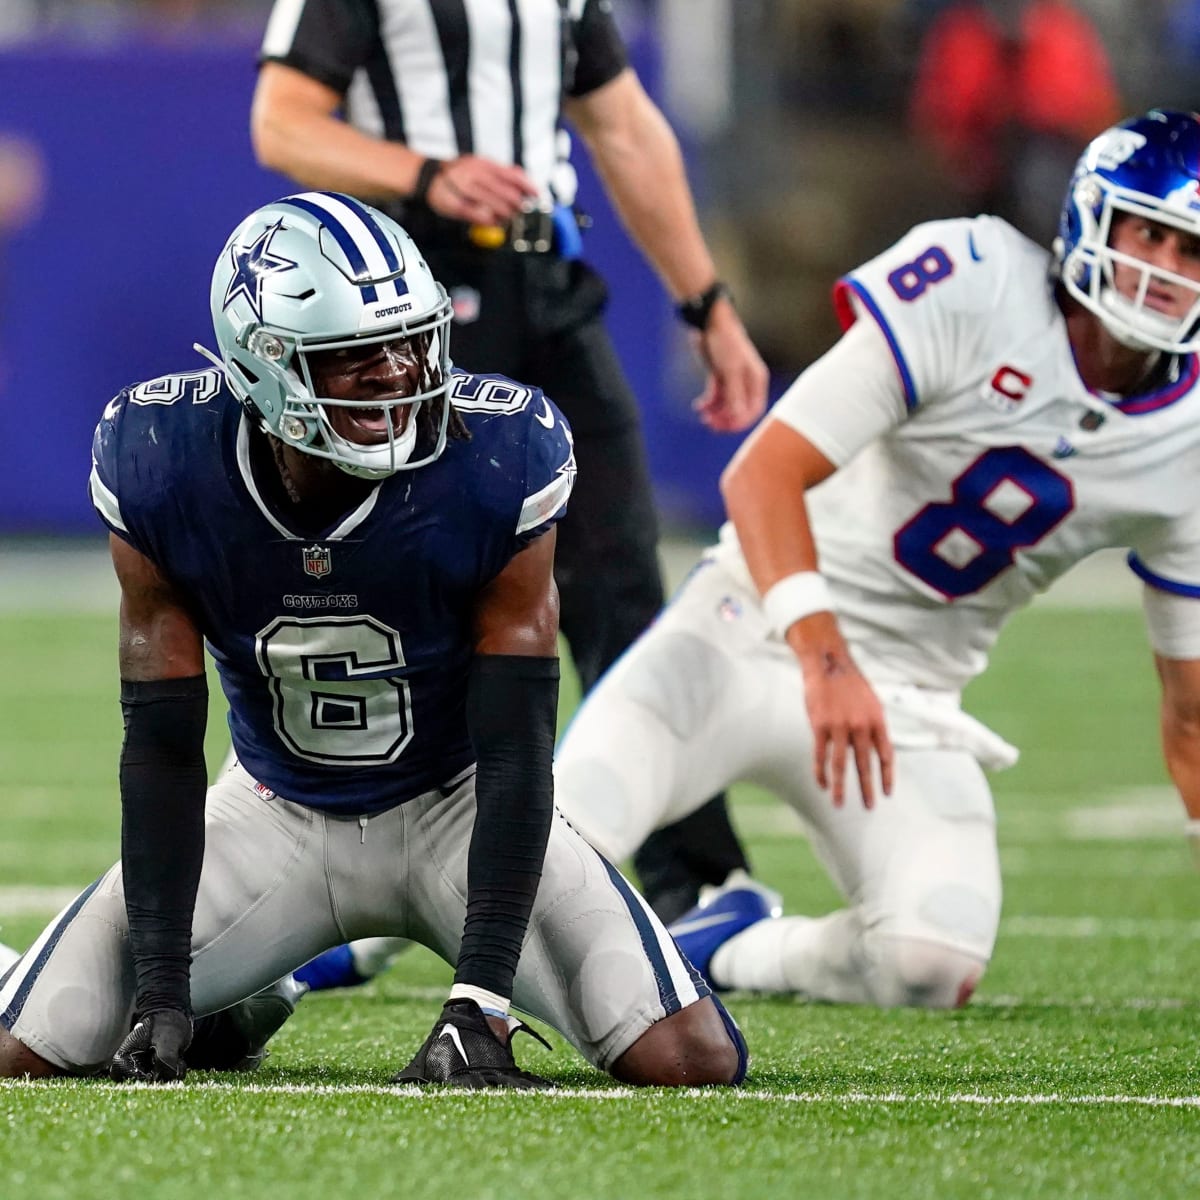 Cowboys-Giants prediction, odds, pick, how to watch NFL Week 1 game